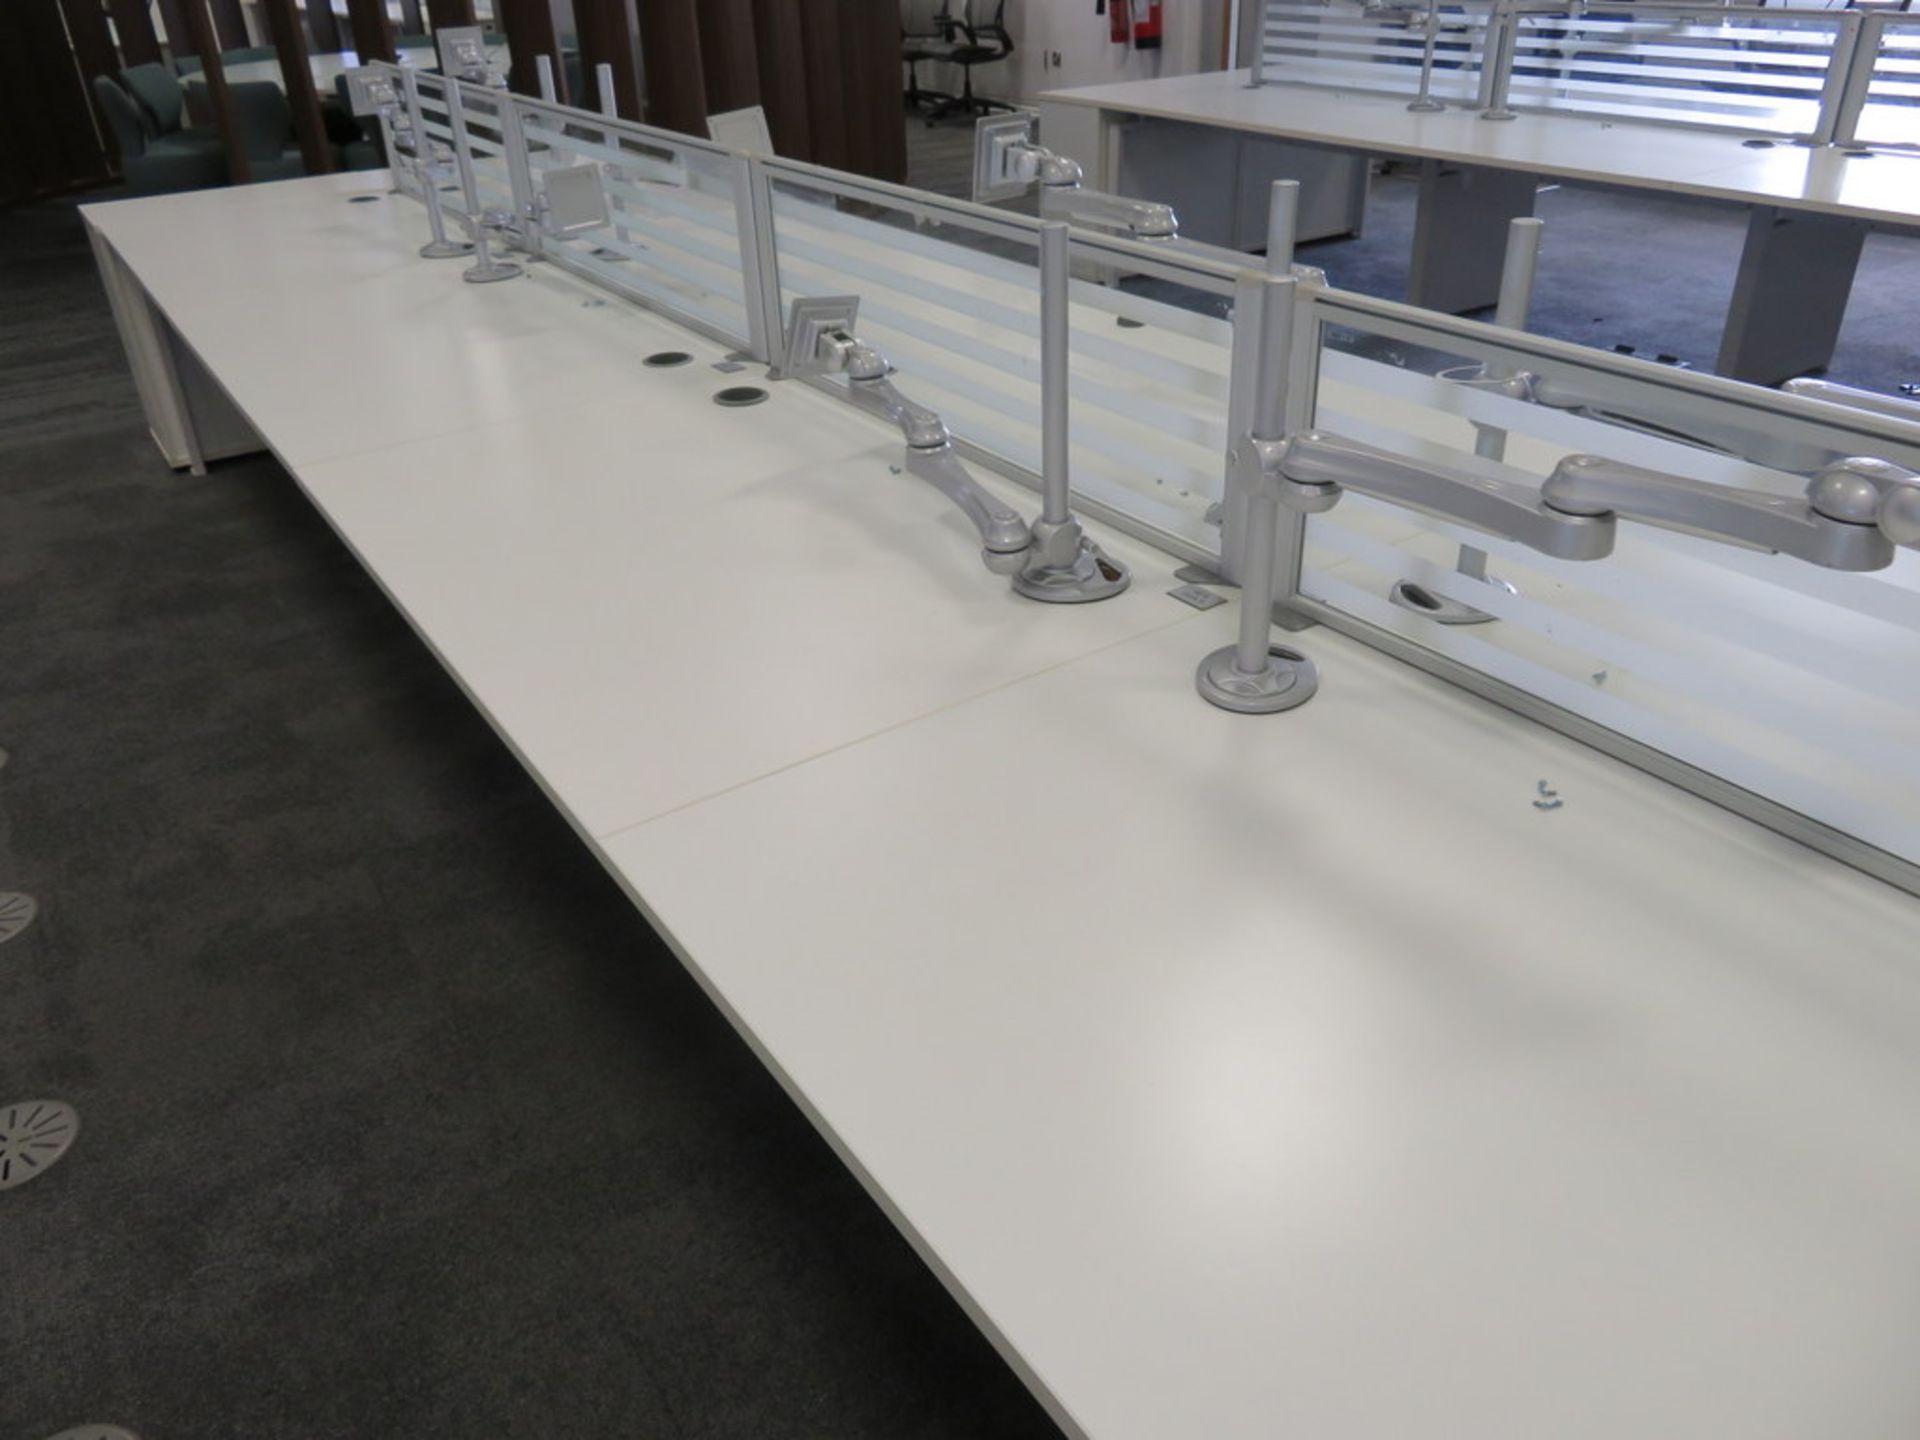 12 Person Desk Arrangement With Dividers, Monitor Arms & Storage Cupboards. - Image 4 of 5